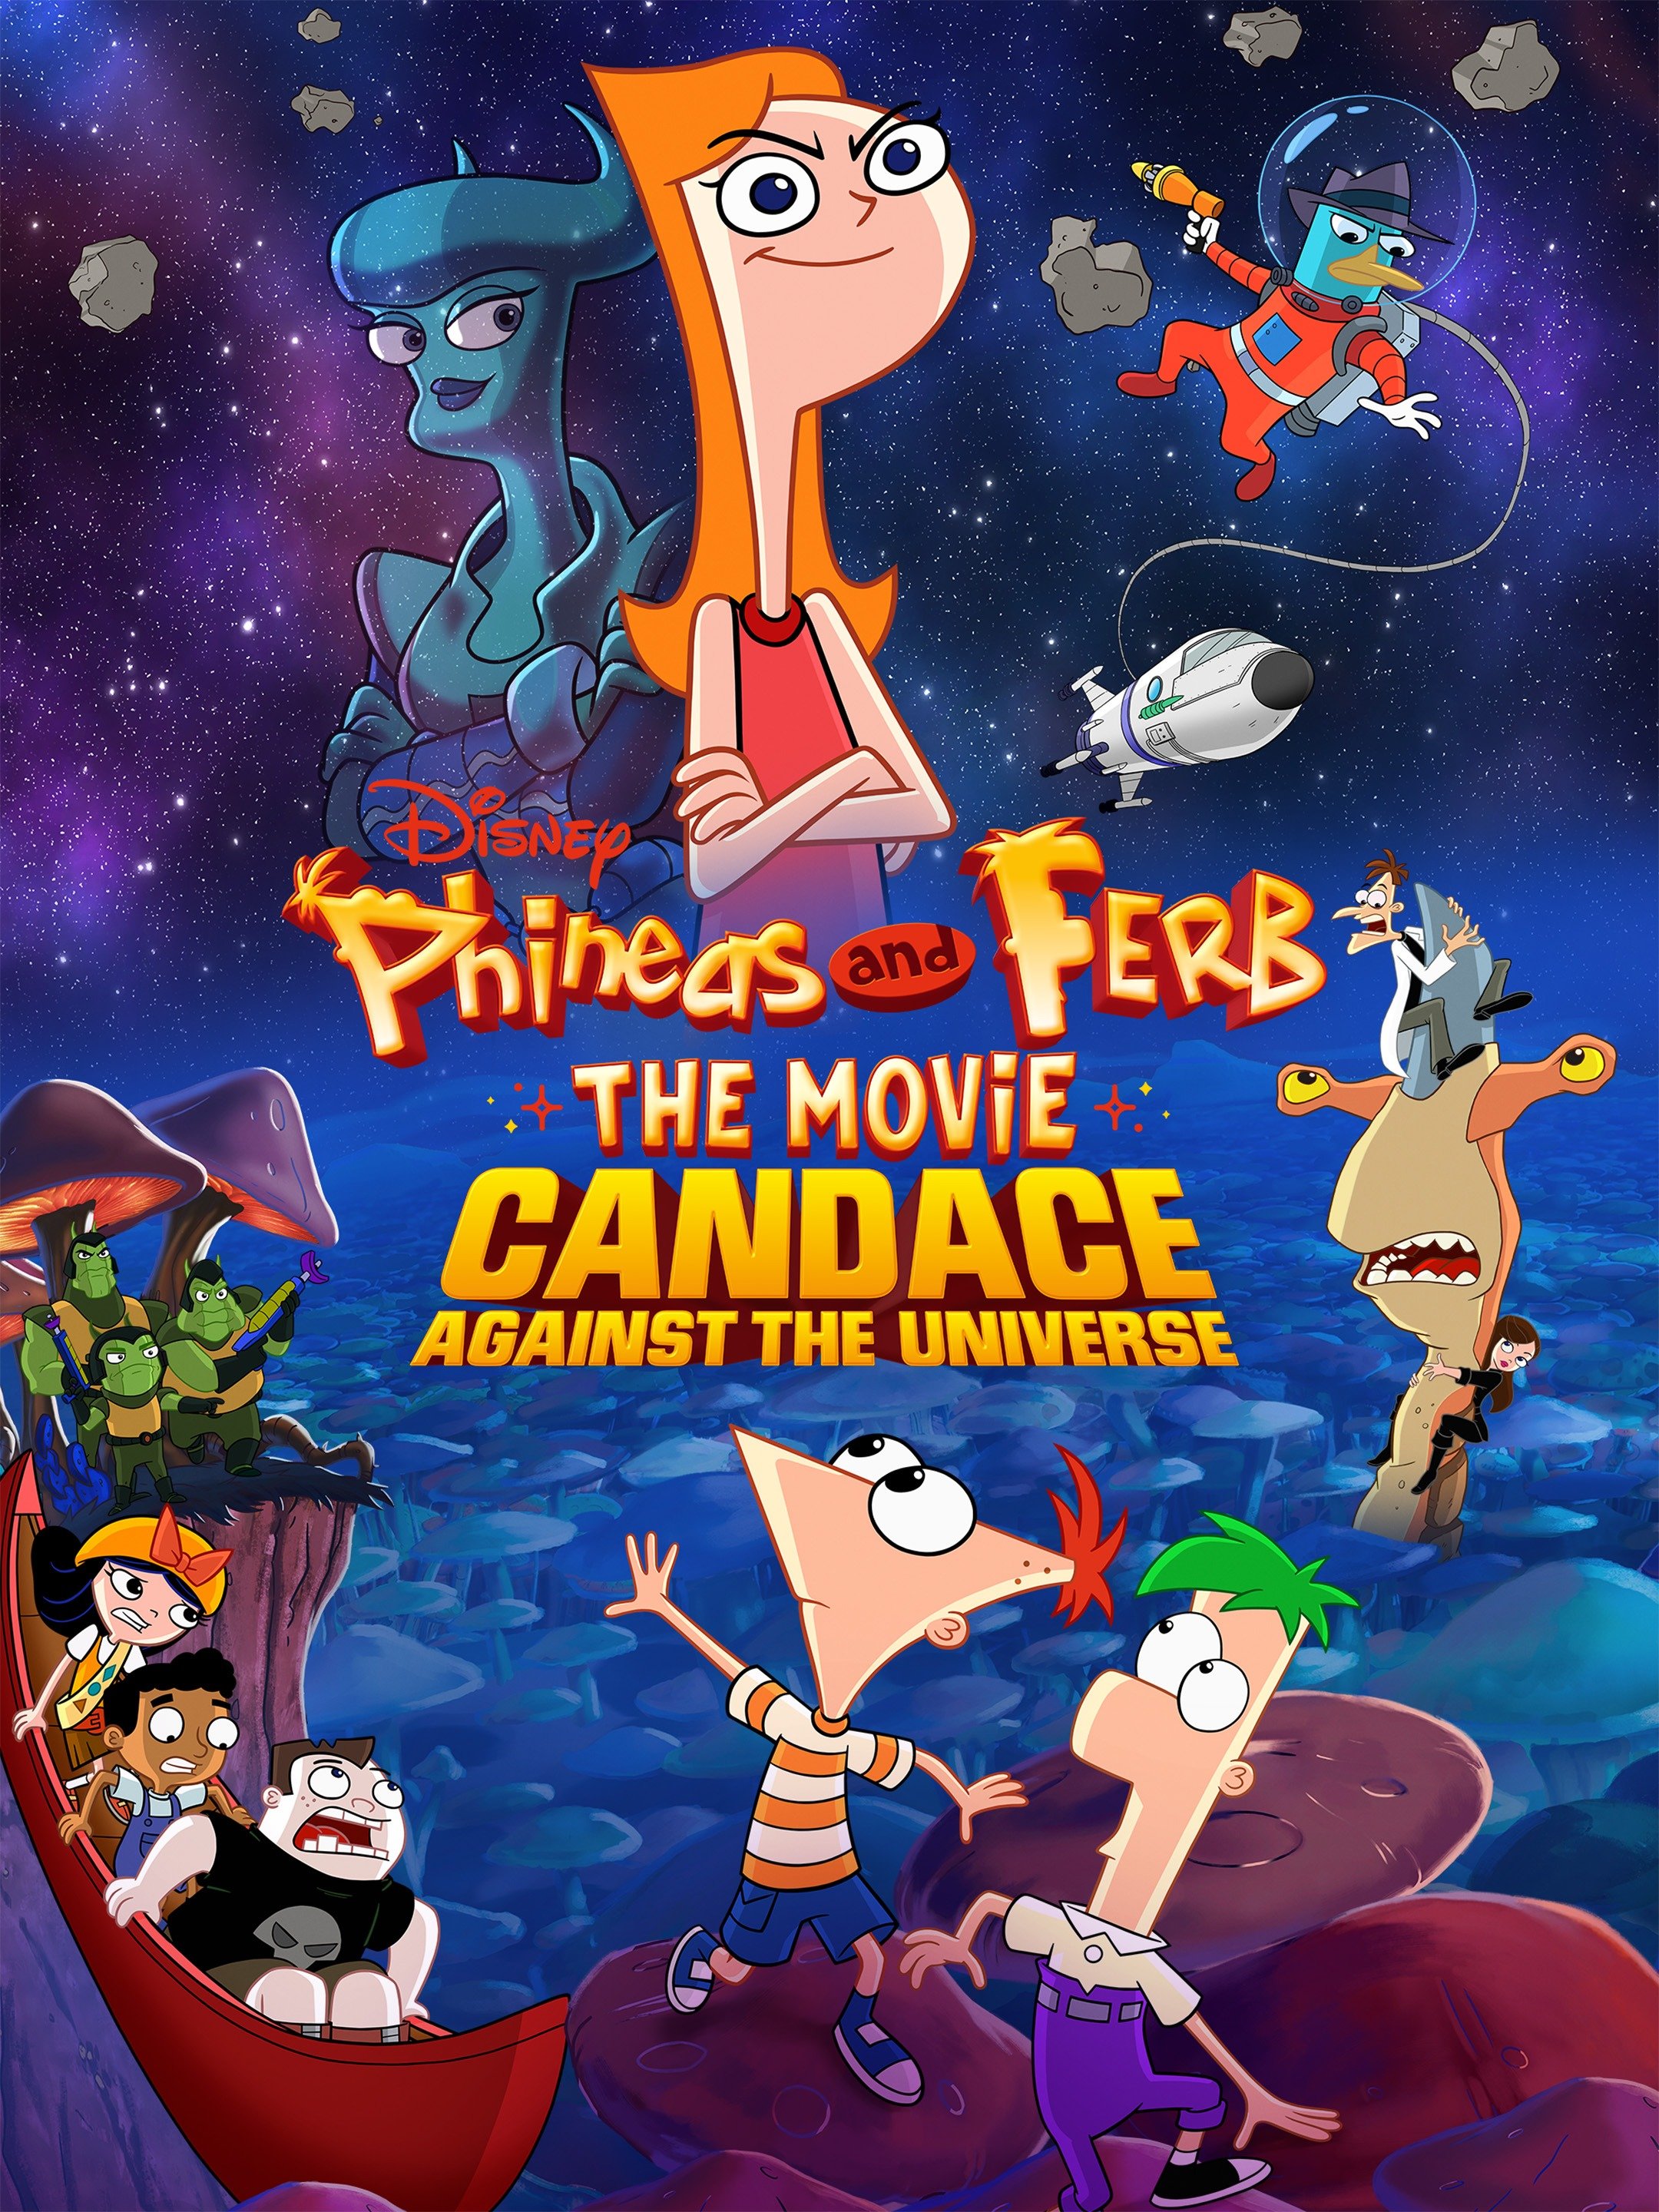 Phineas And Ferb The Movie Candace Against The Universe Trailer 1 Trailers And Videos Rotten 5622